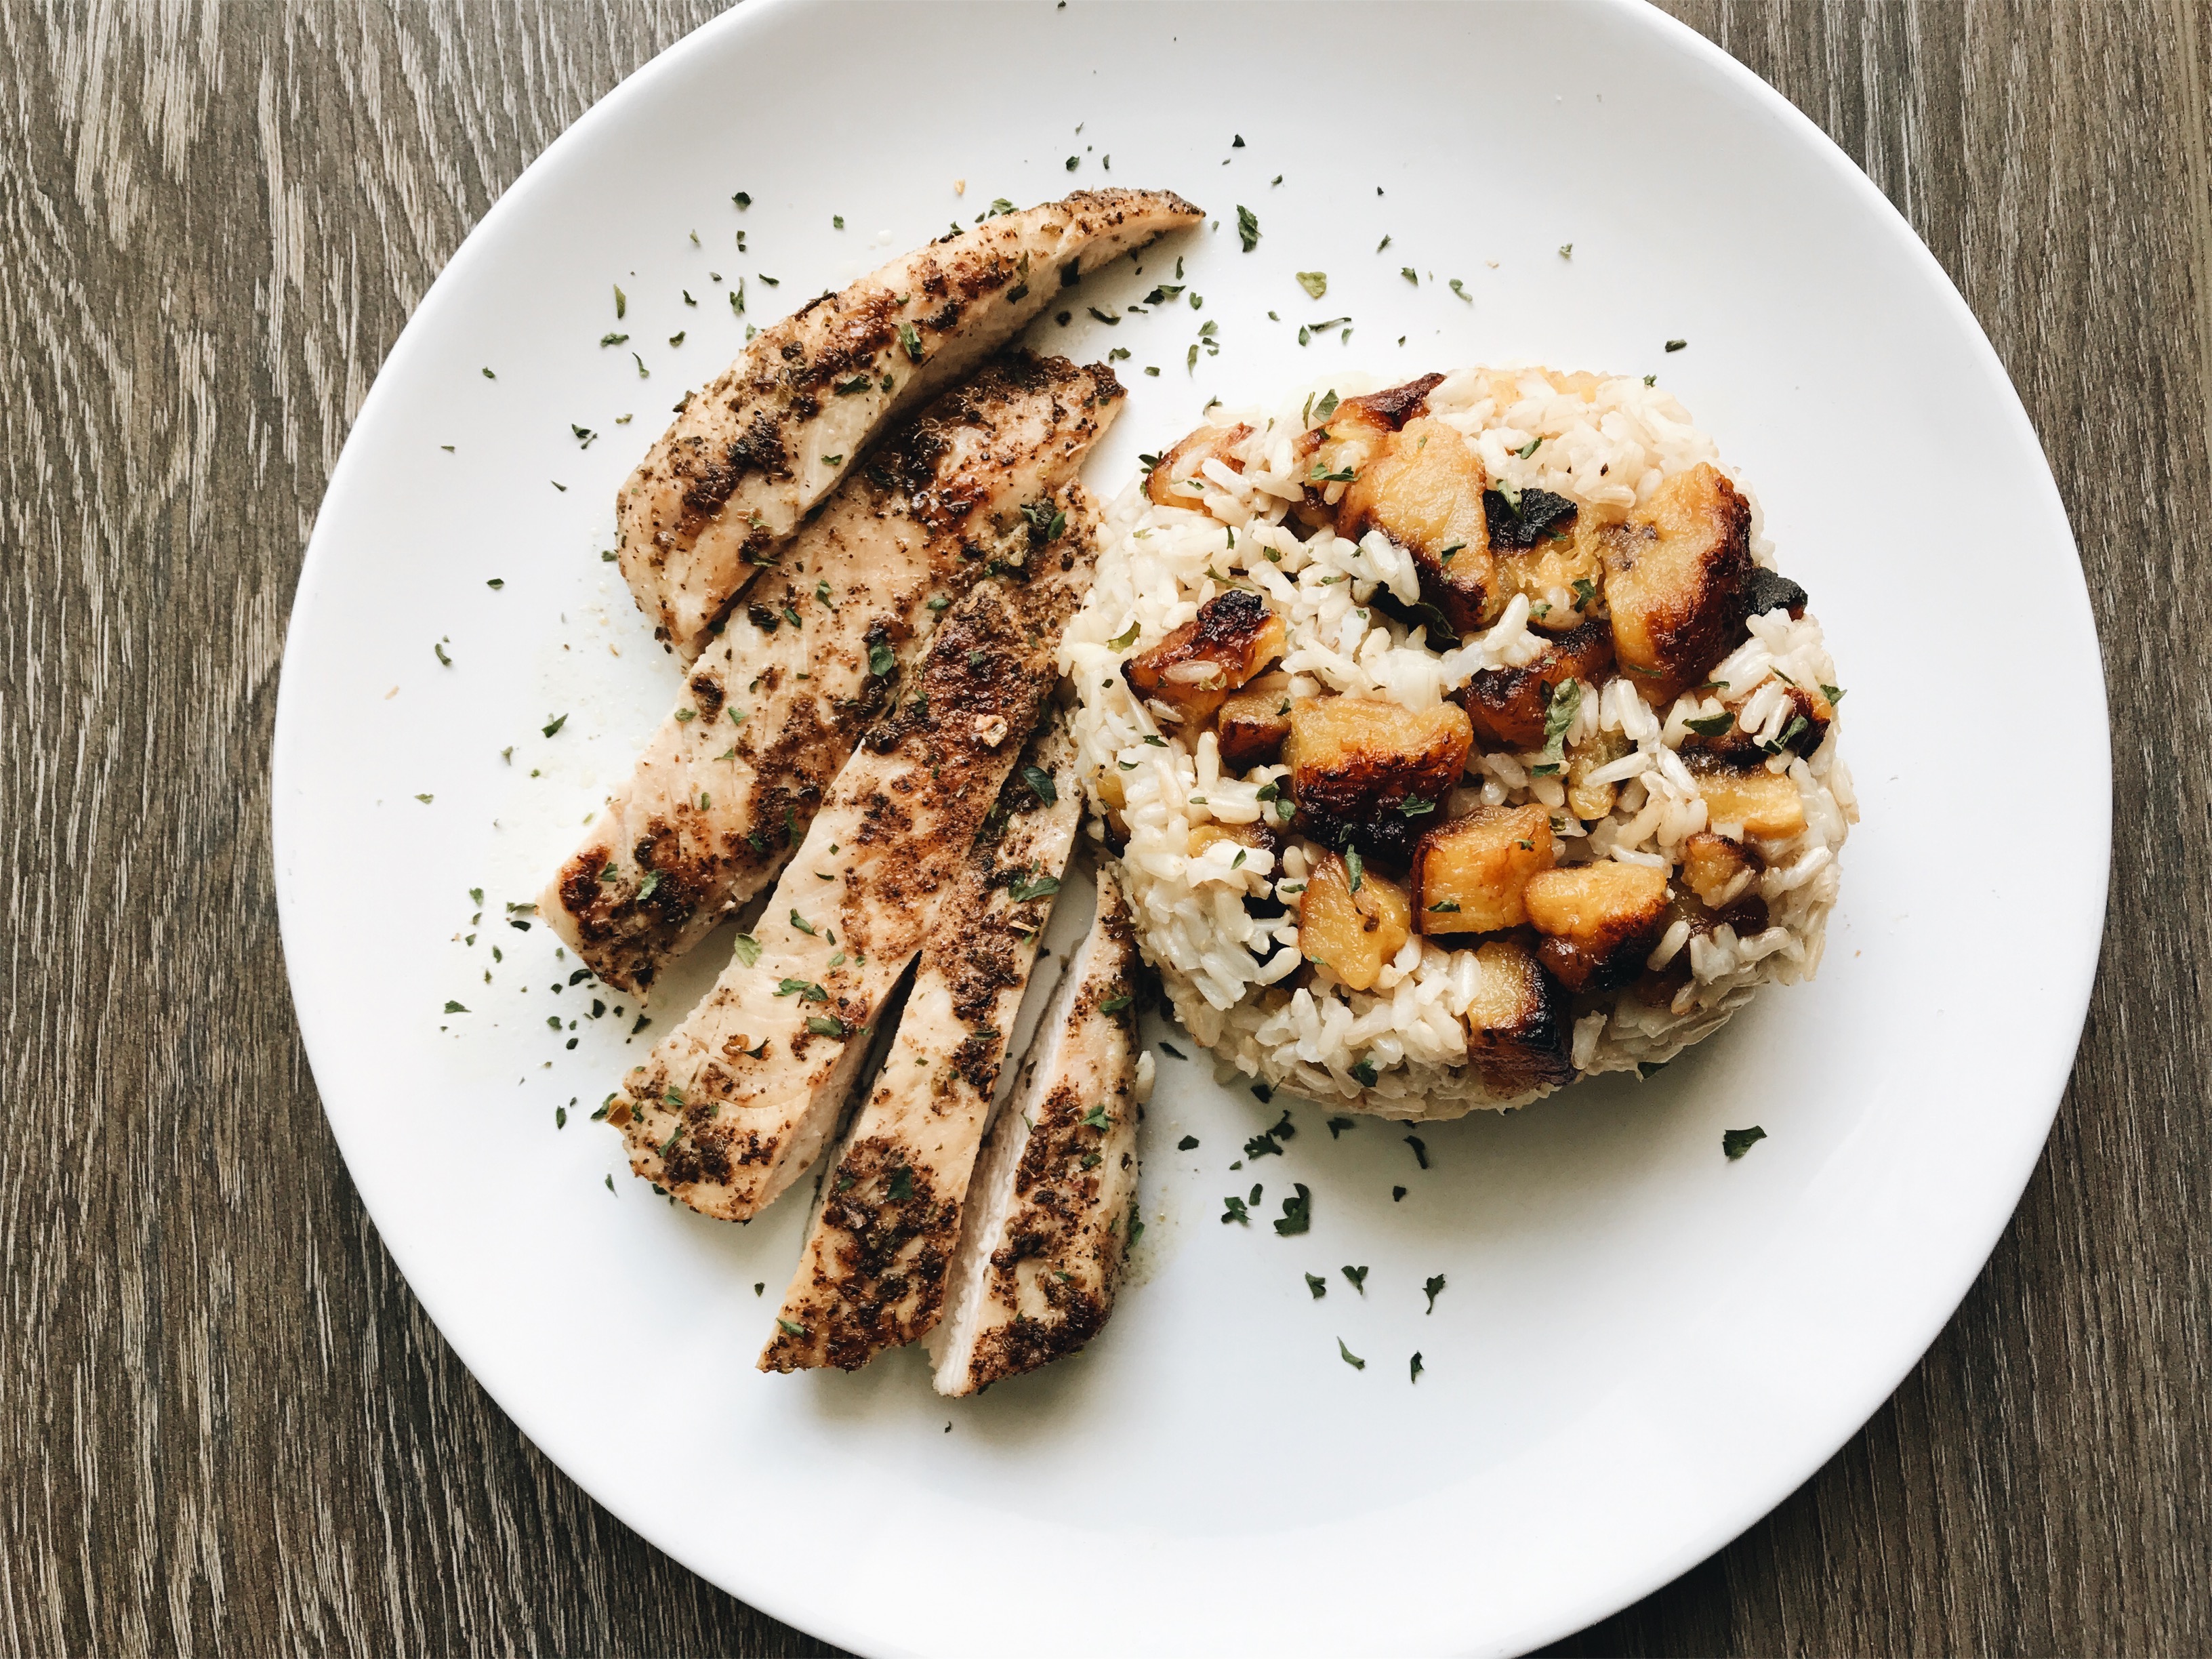 Travel Noire Eats and Recipes: Nigerian Chicken And Plantain Rice